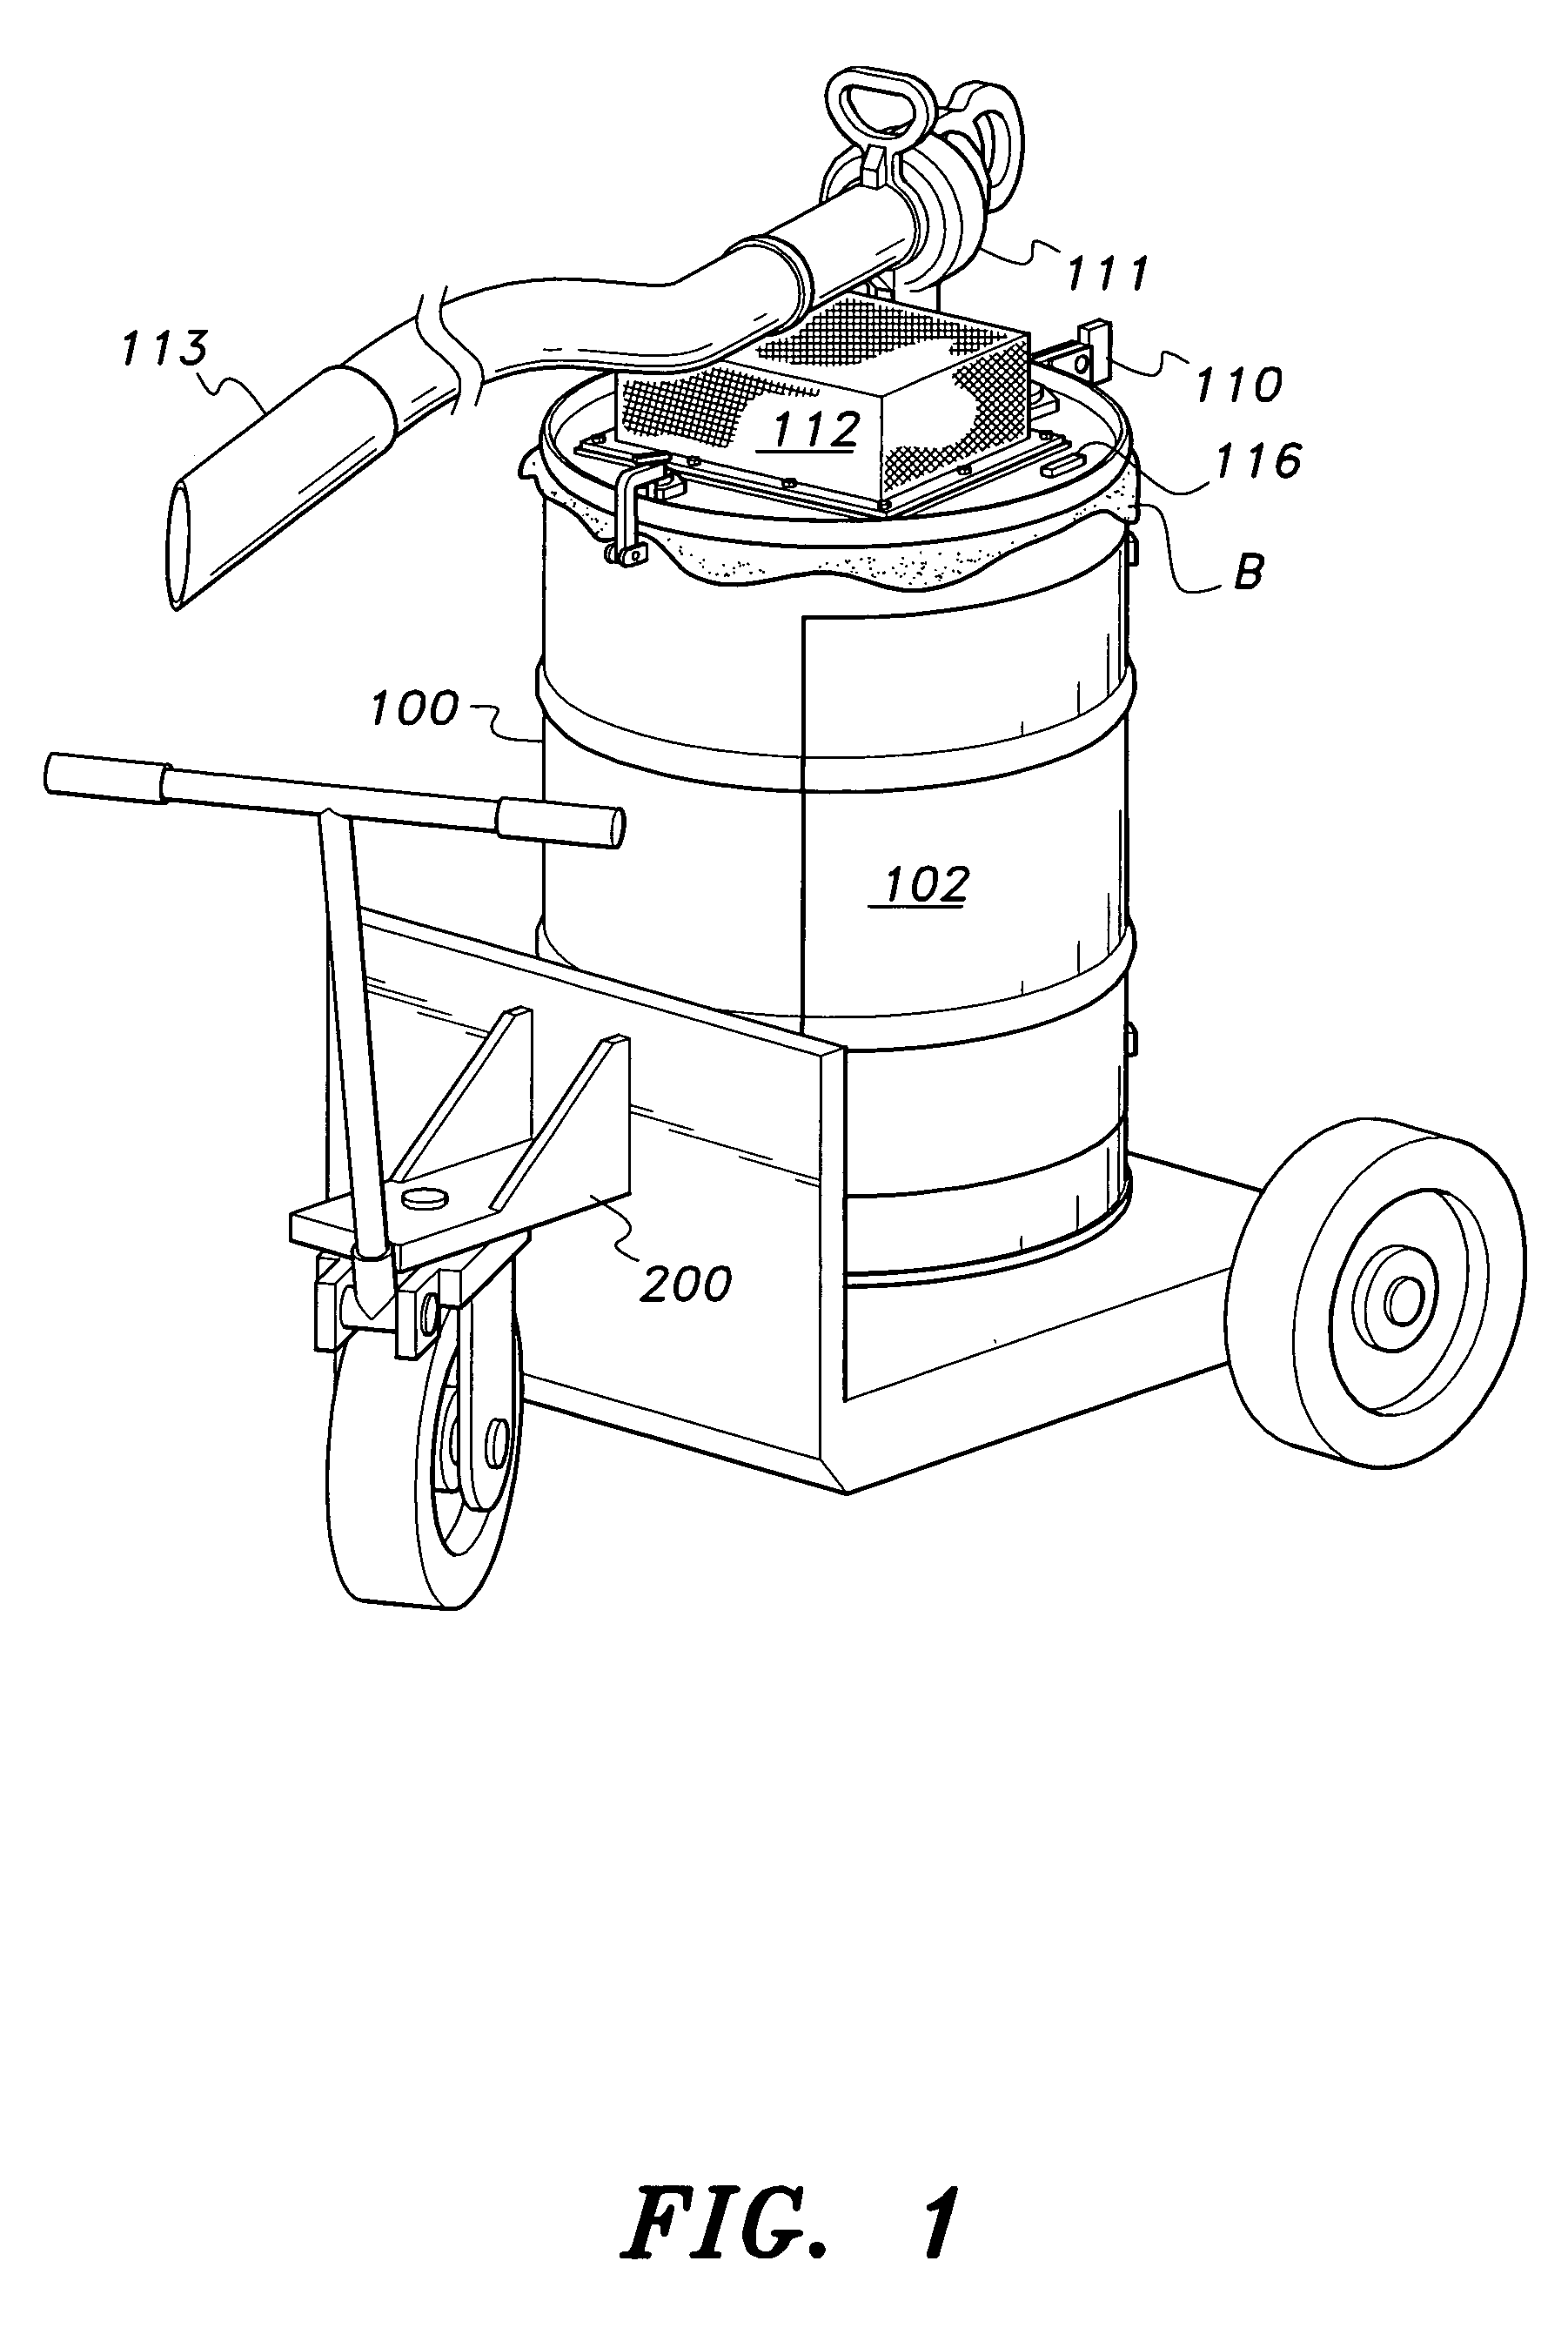 Bagger attachment for leaf blower